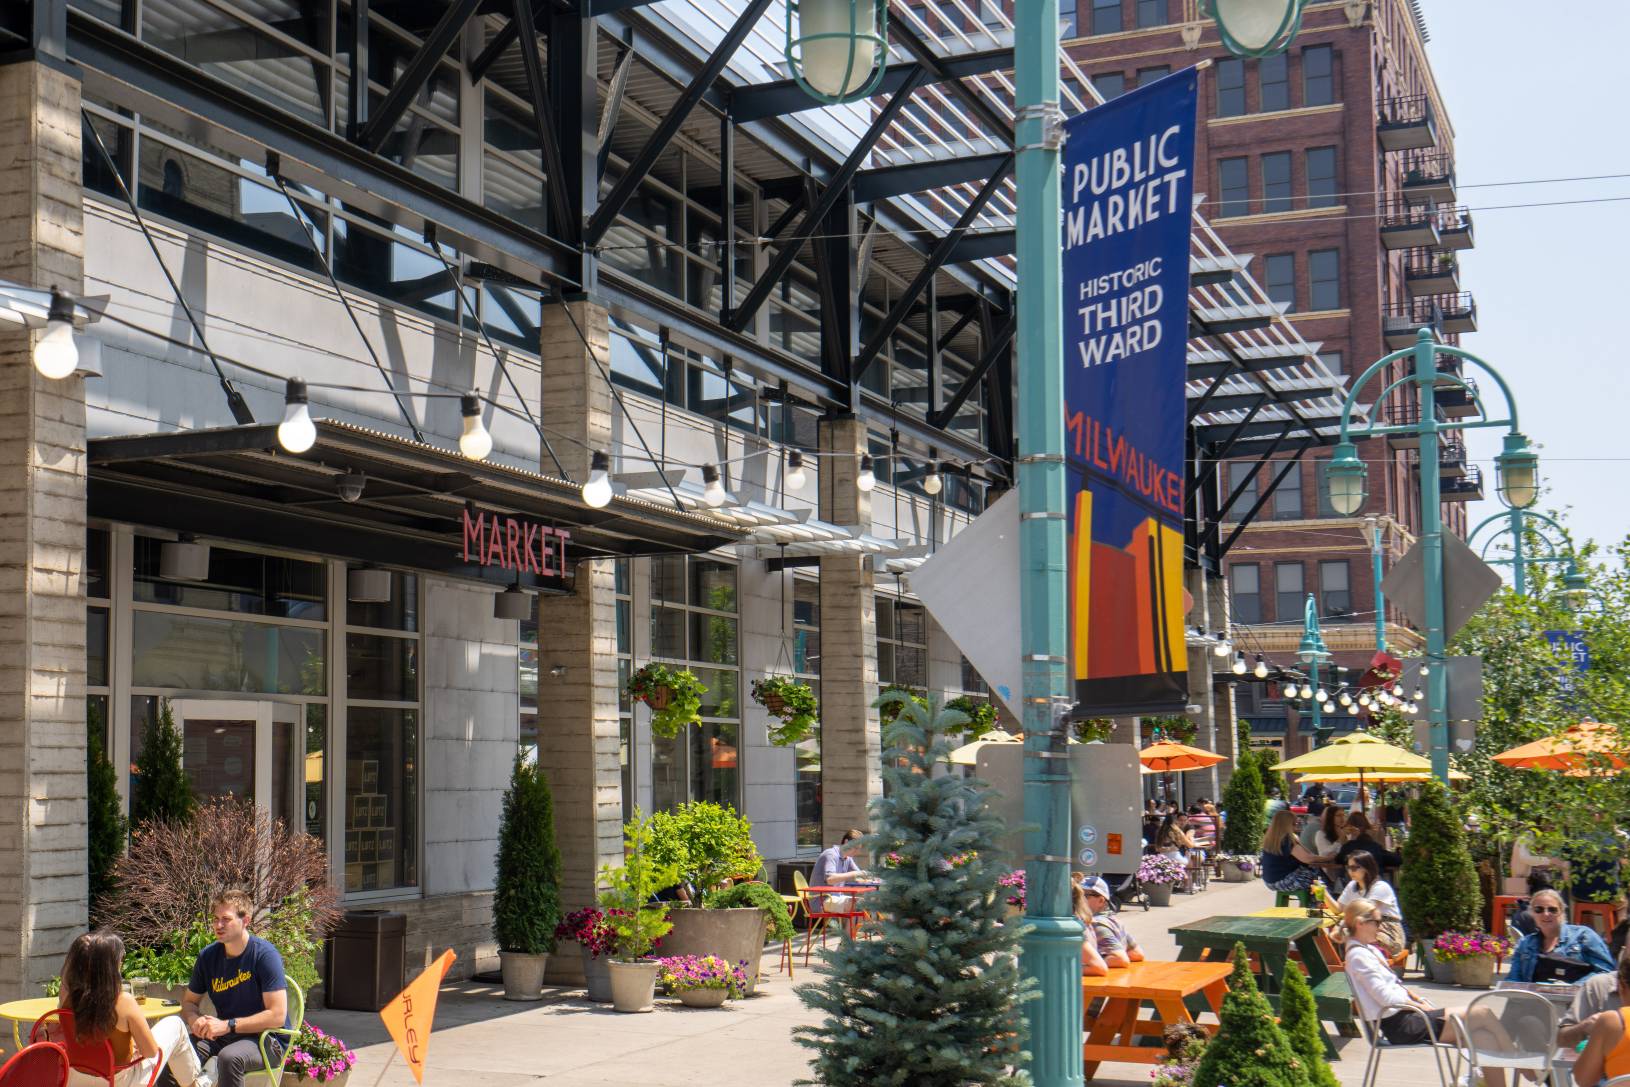 the wide planted sidewalks around the Public Market in the historic Third Ward port district